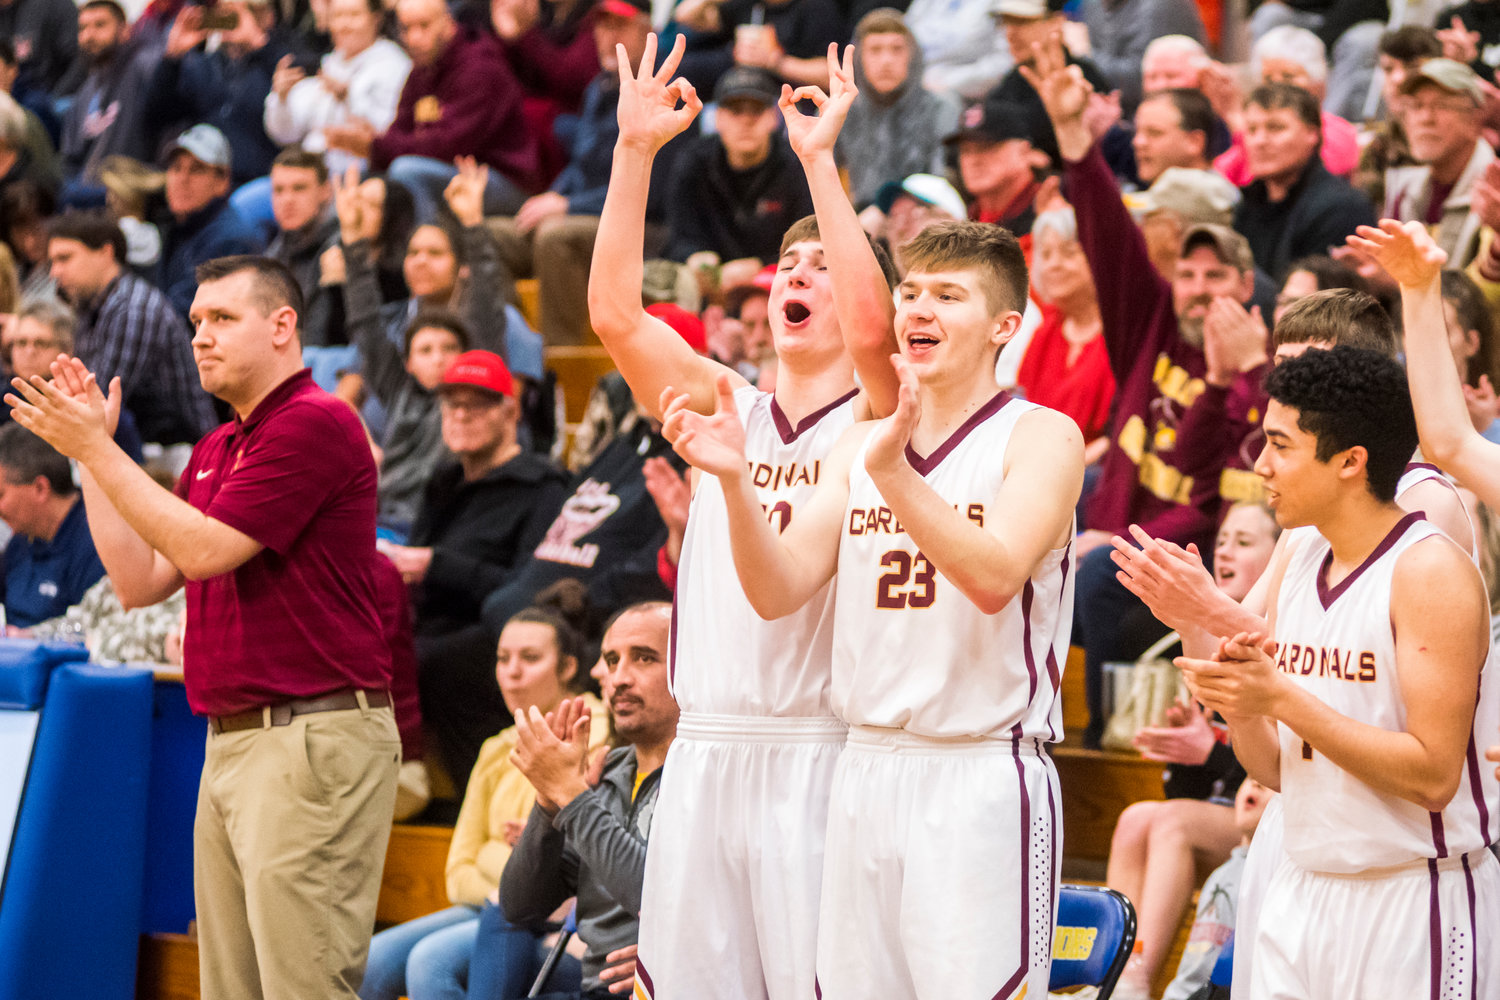 Winlock players cheer during a game against Northwest Christian Saturday night in Rochester.